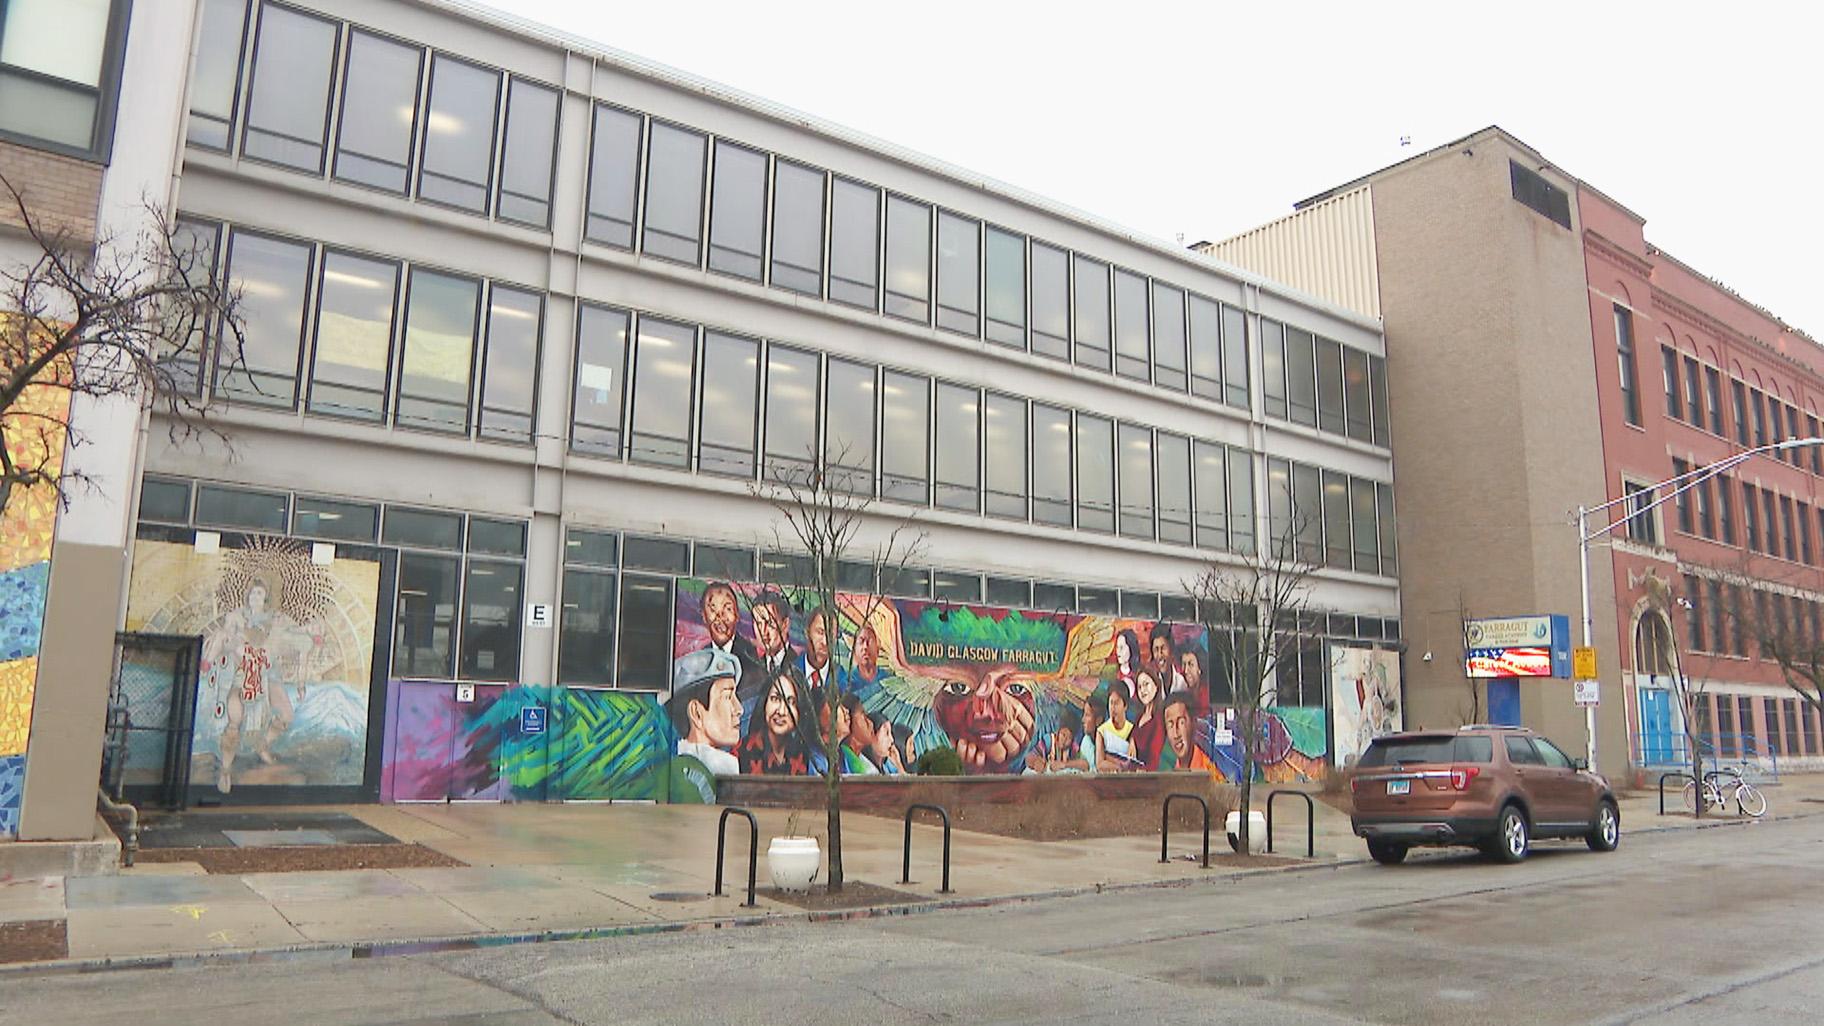 Farragut Career Academy High School, 2345 S. Christiana Ave., is pictured in a file photo. (WTTW News)